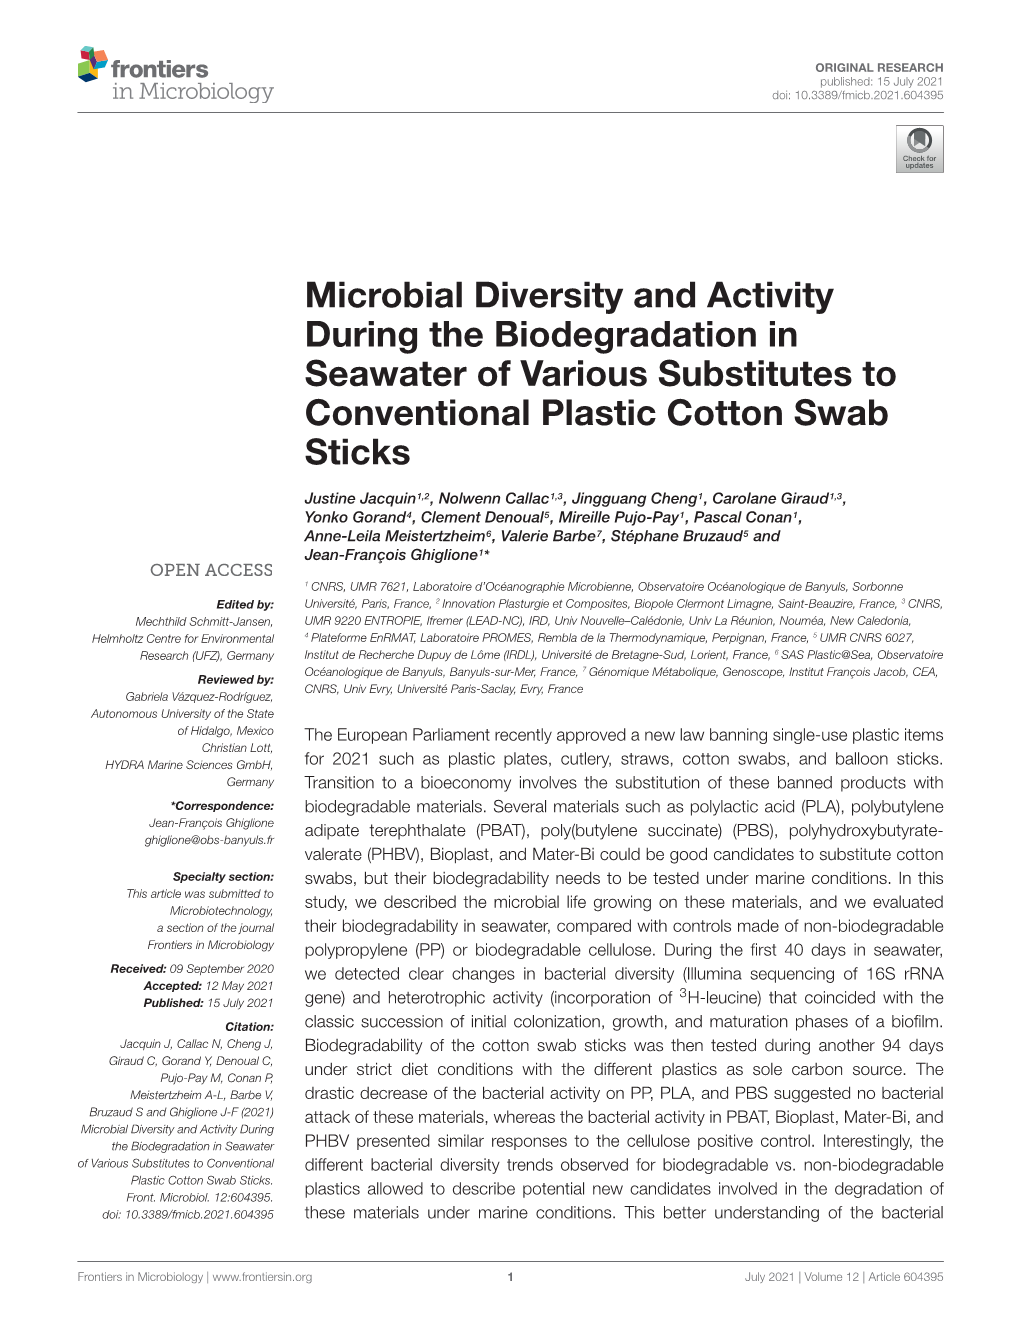 Microbial Diversity and Activity During the Biodegradation in Seawater of Various Substitutes to Conventional Plastic Cotton Swab Sticks